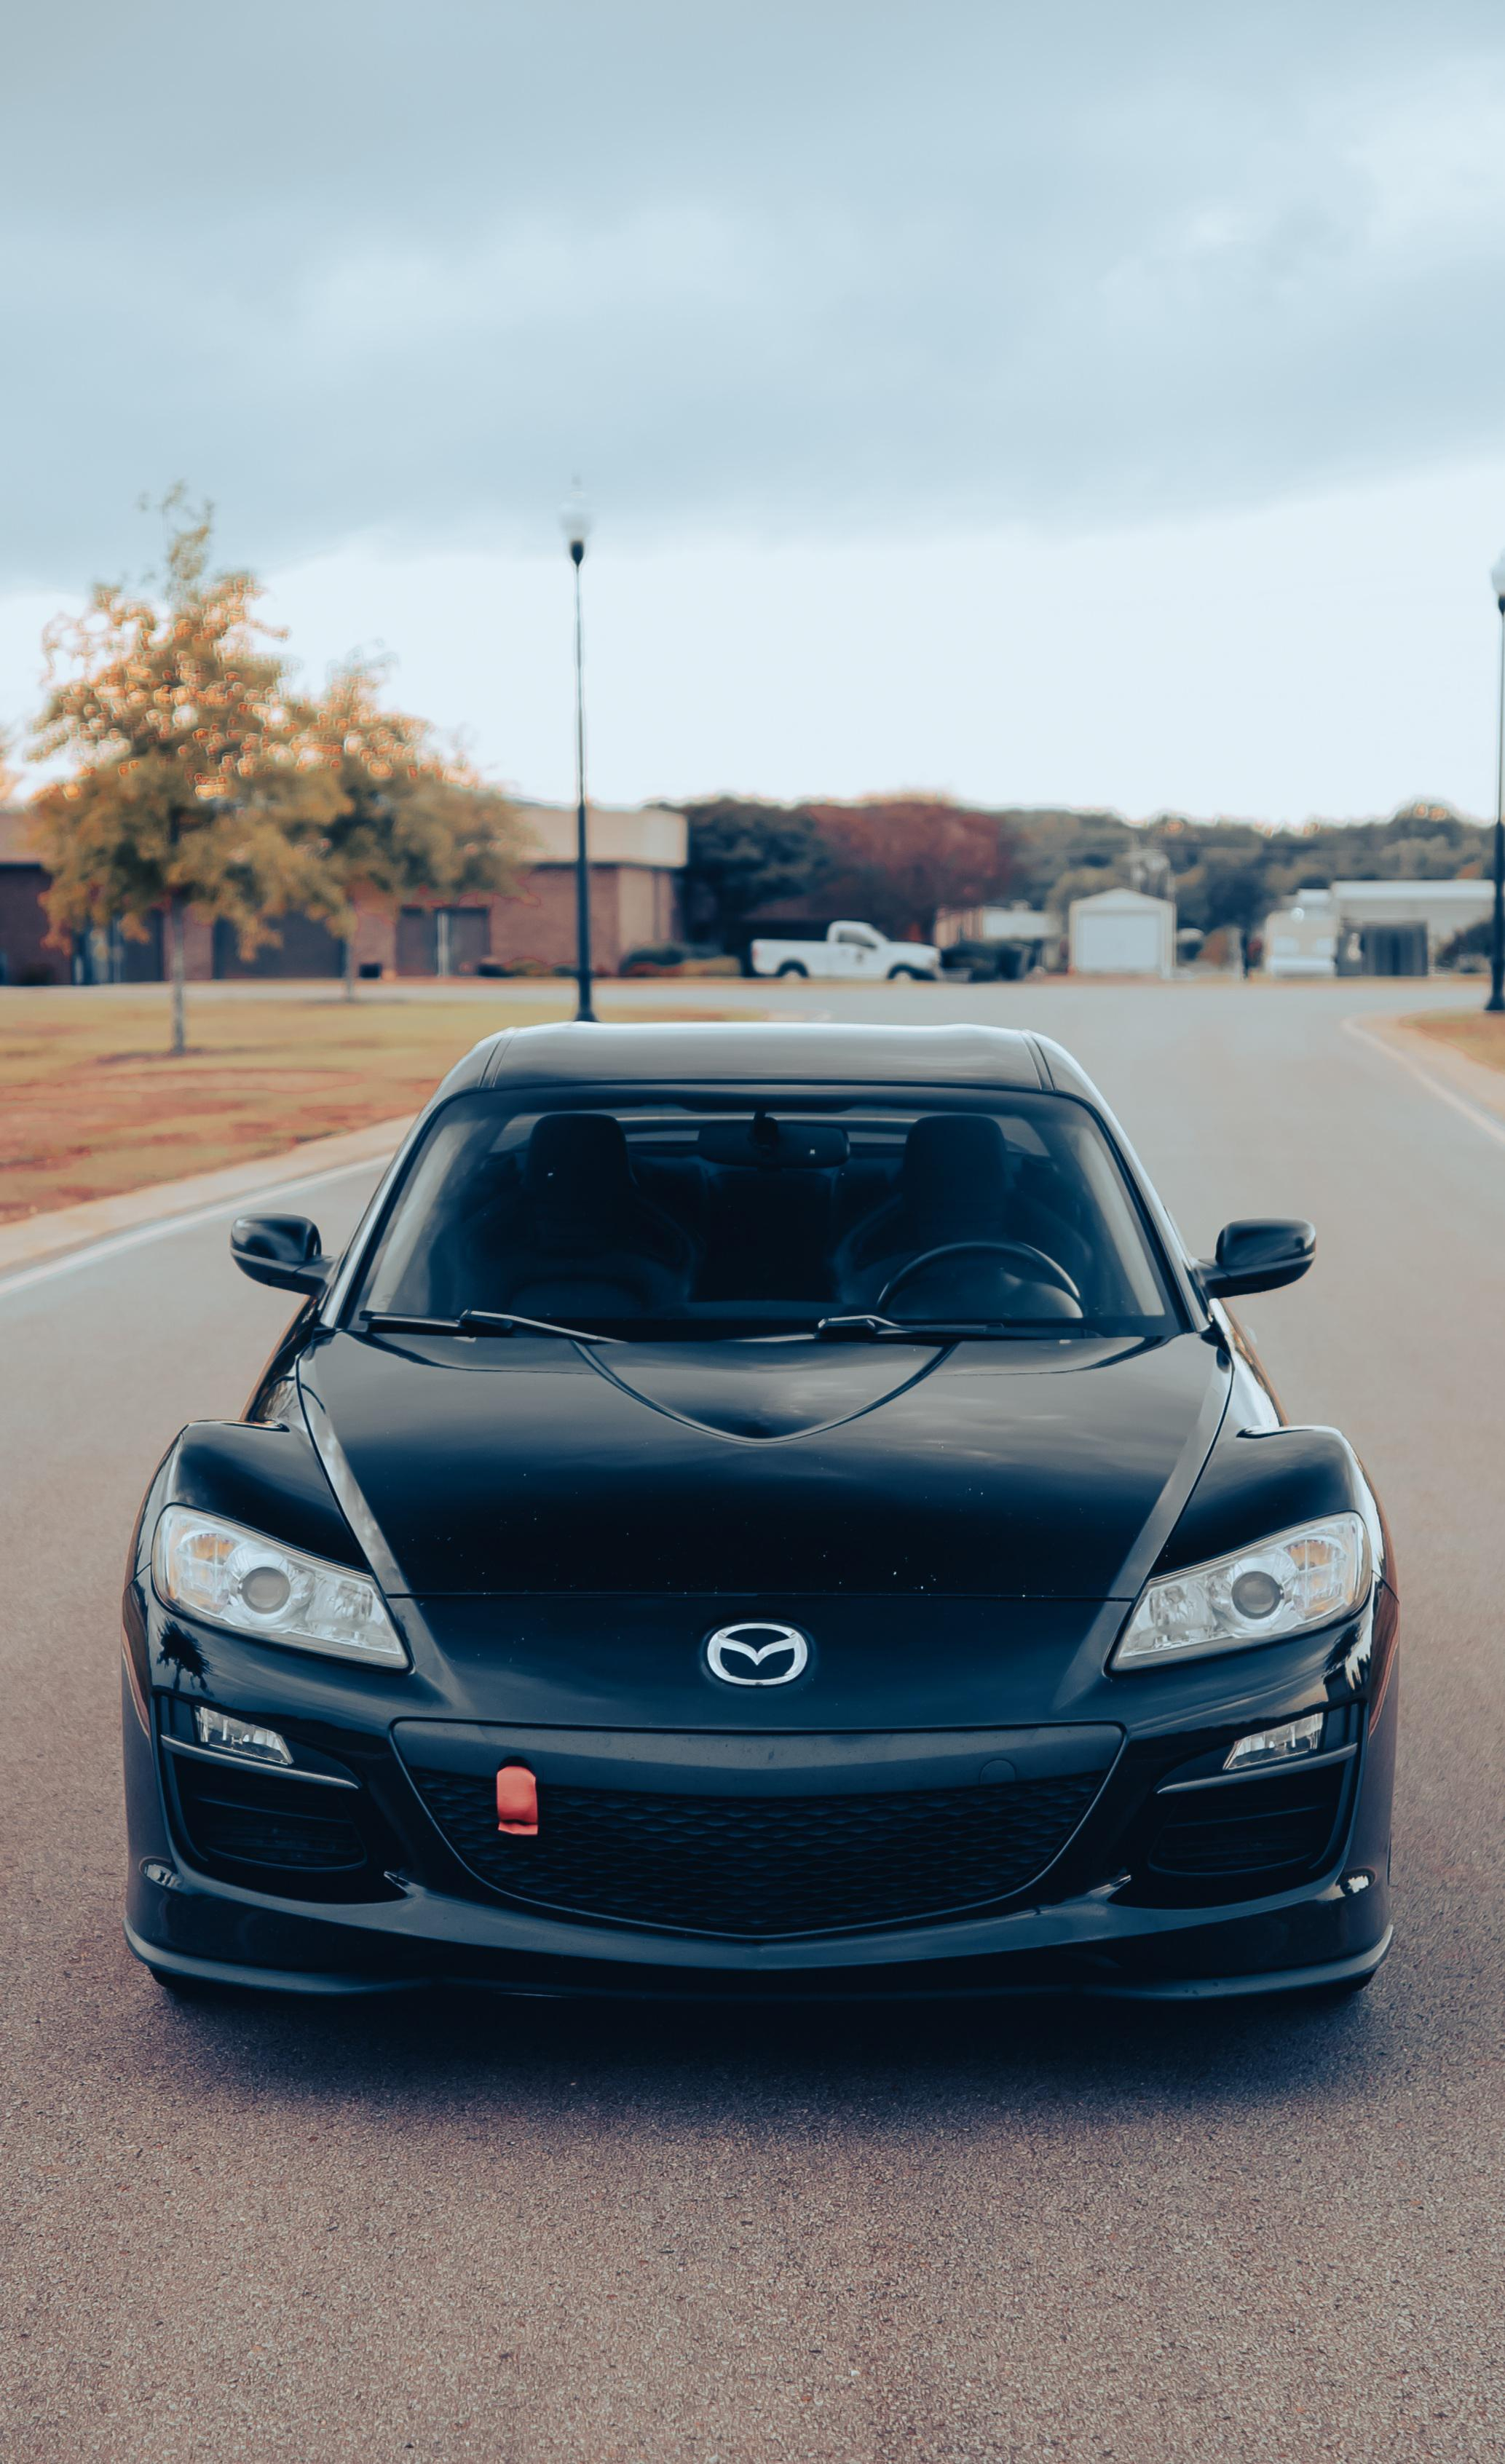 2067x3385 Some of my photoshoot backgrounds I thought I'd throw out there : r/RX8